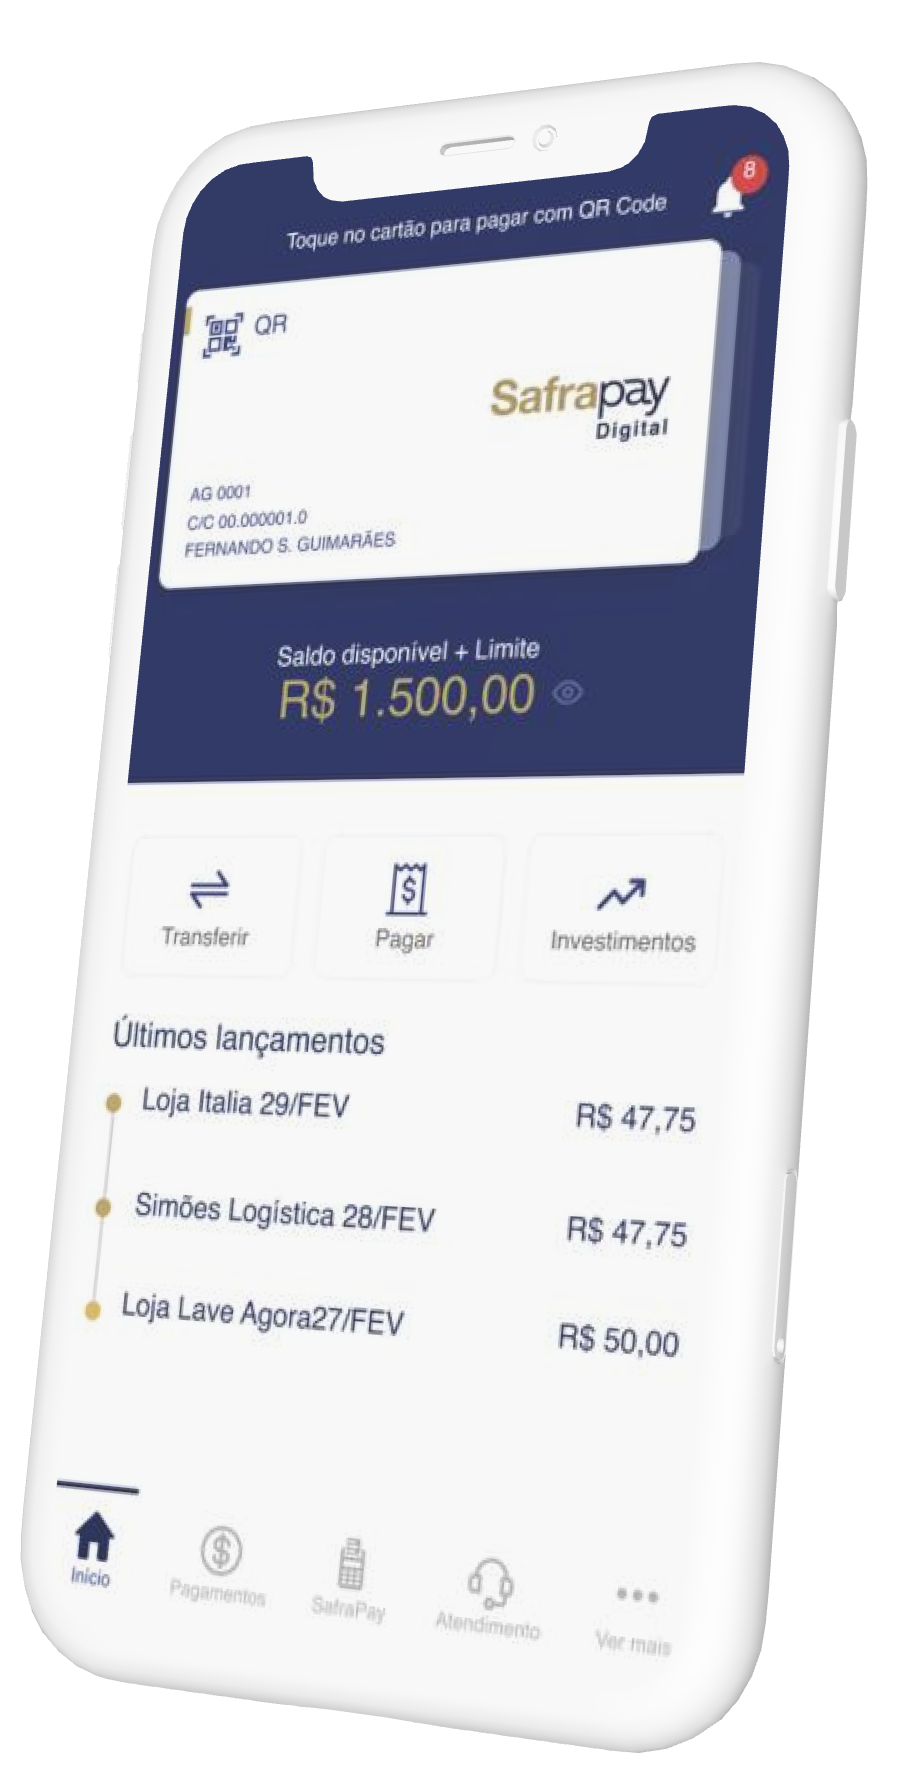 Payment Solutions Luby Software